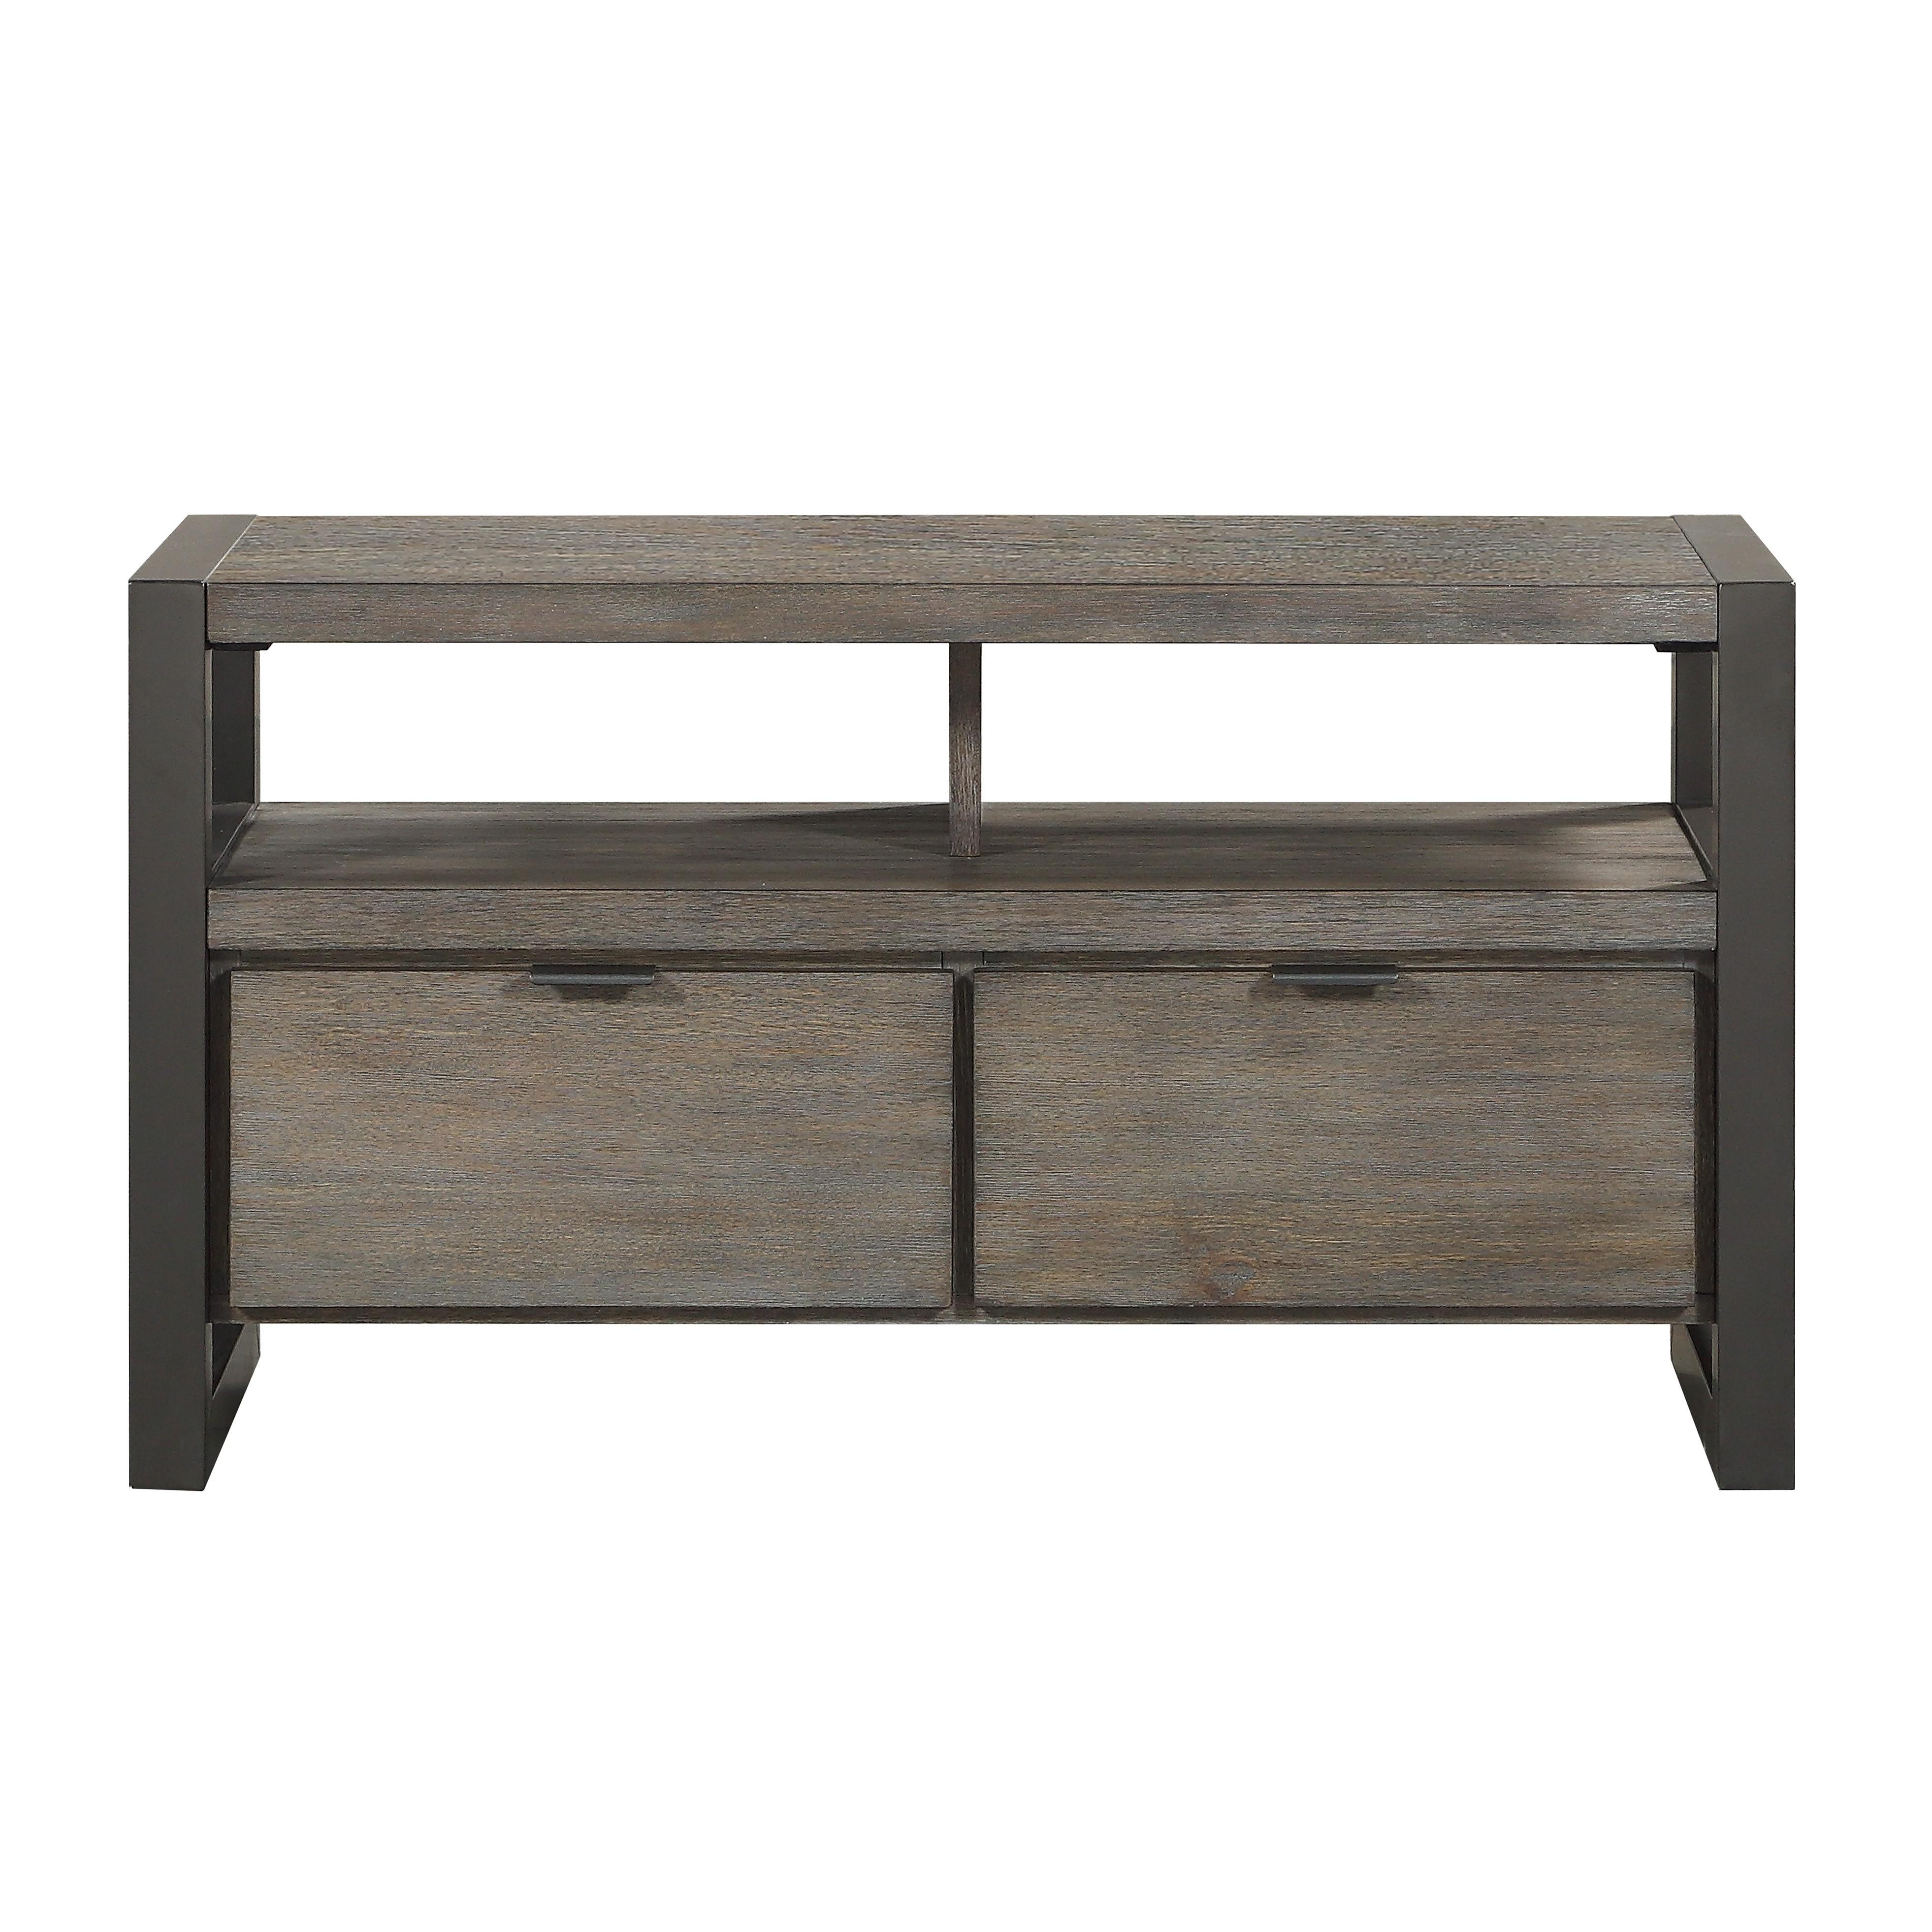 Homelegance 4550-40T Prudhoe TV Stand